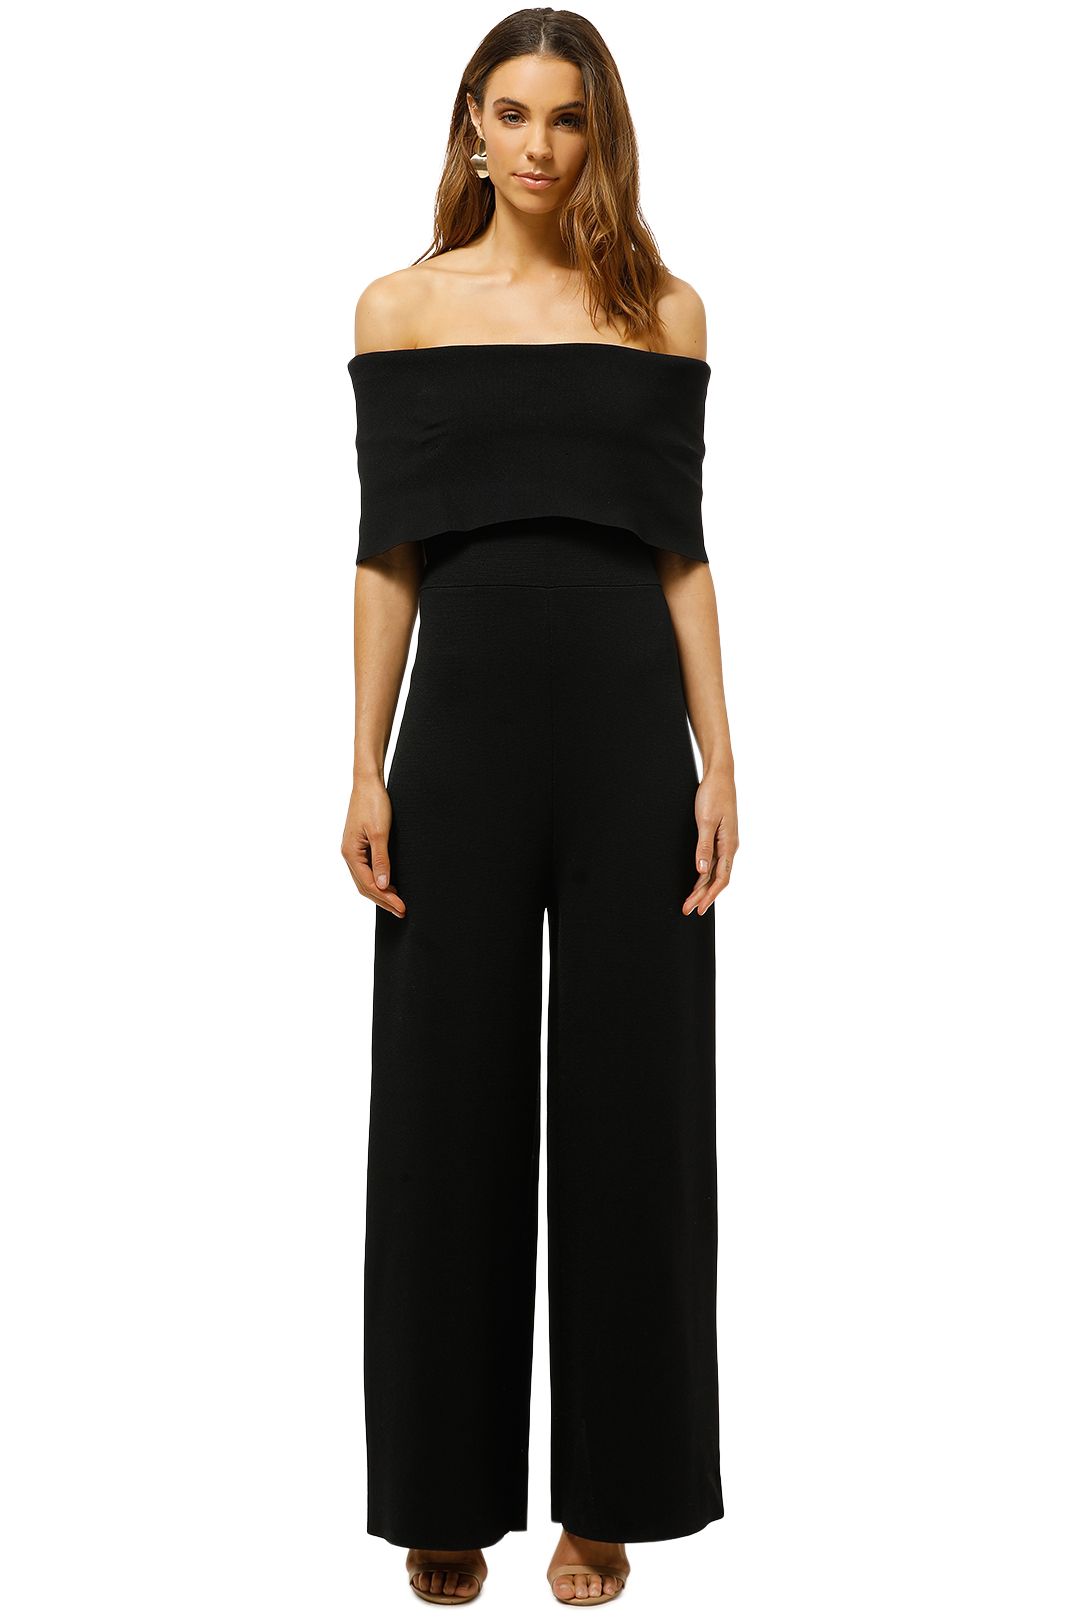 Witchery-Fold-Over-Knit-Jumpsuit-Black-Front